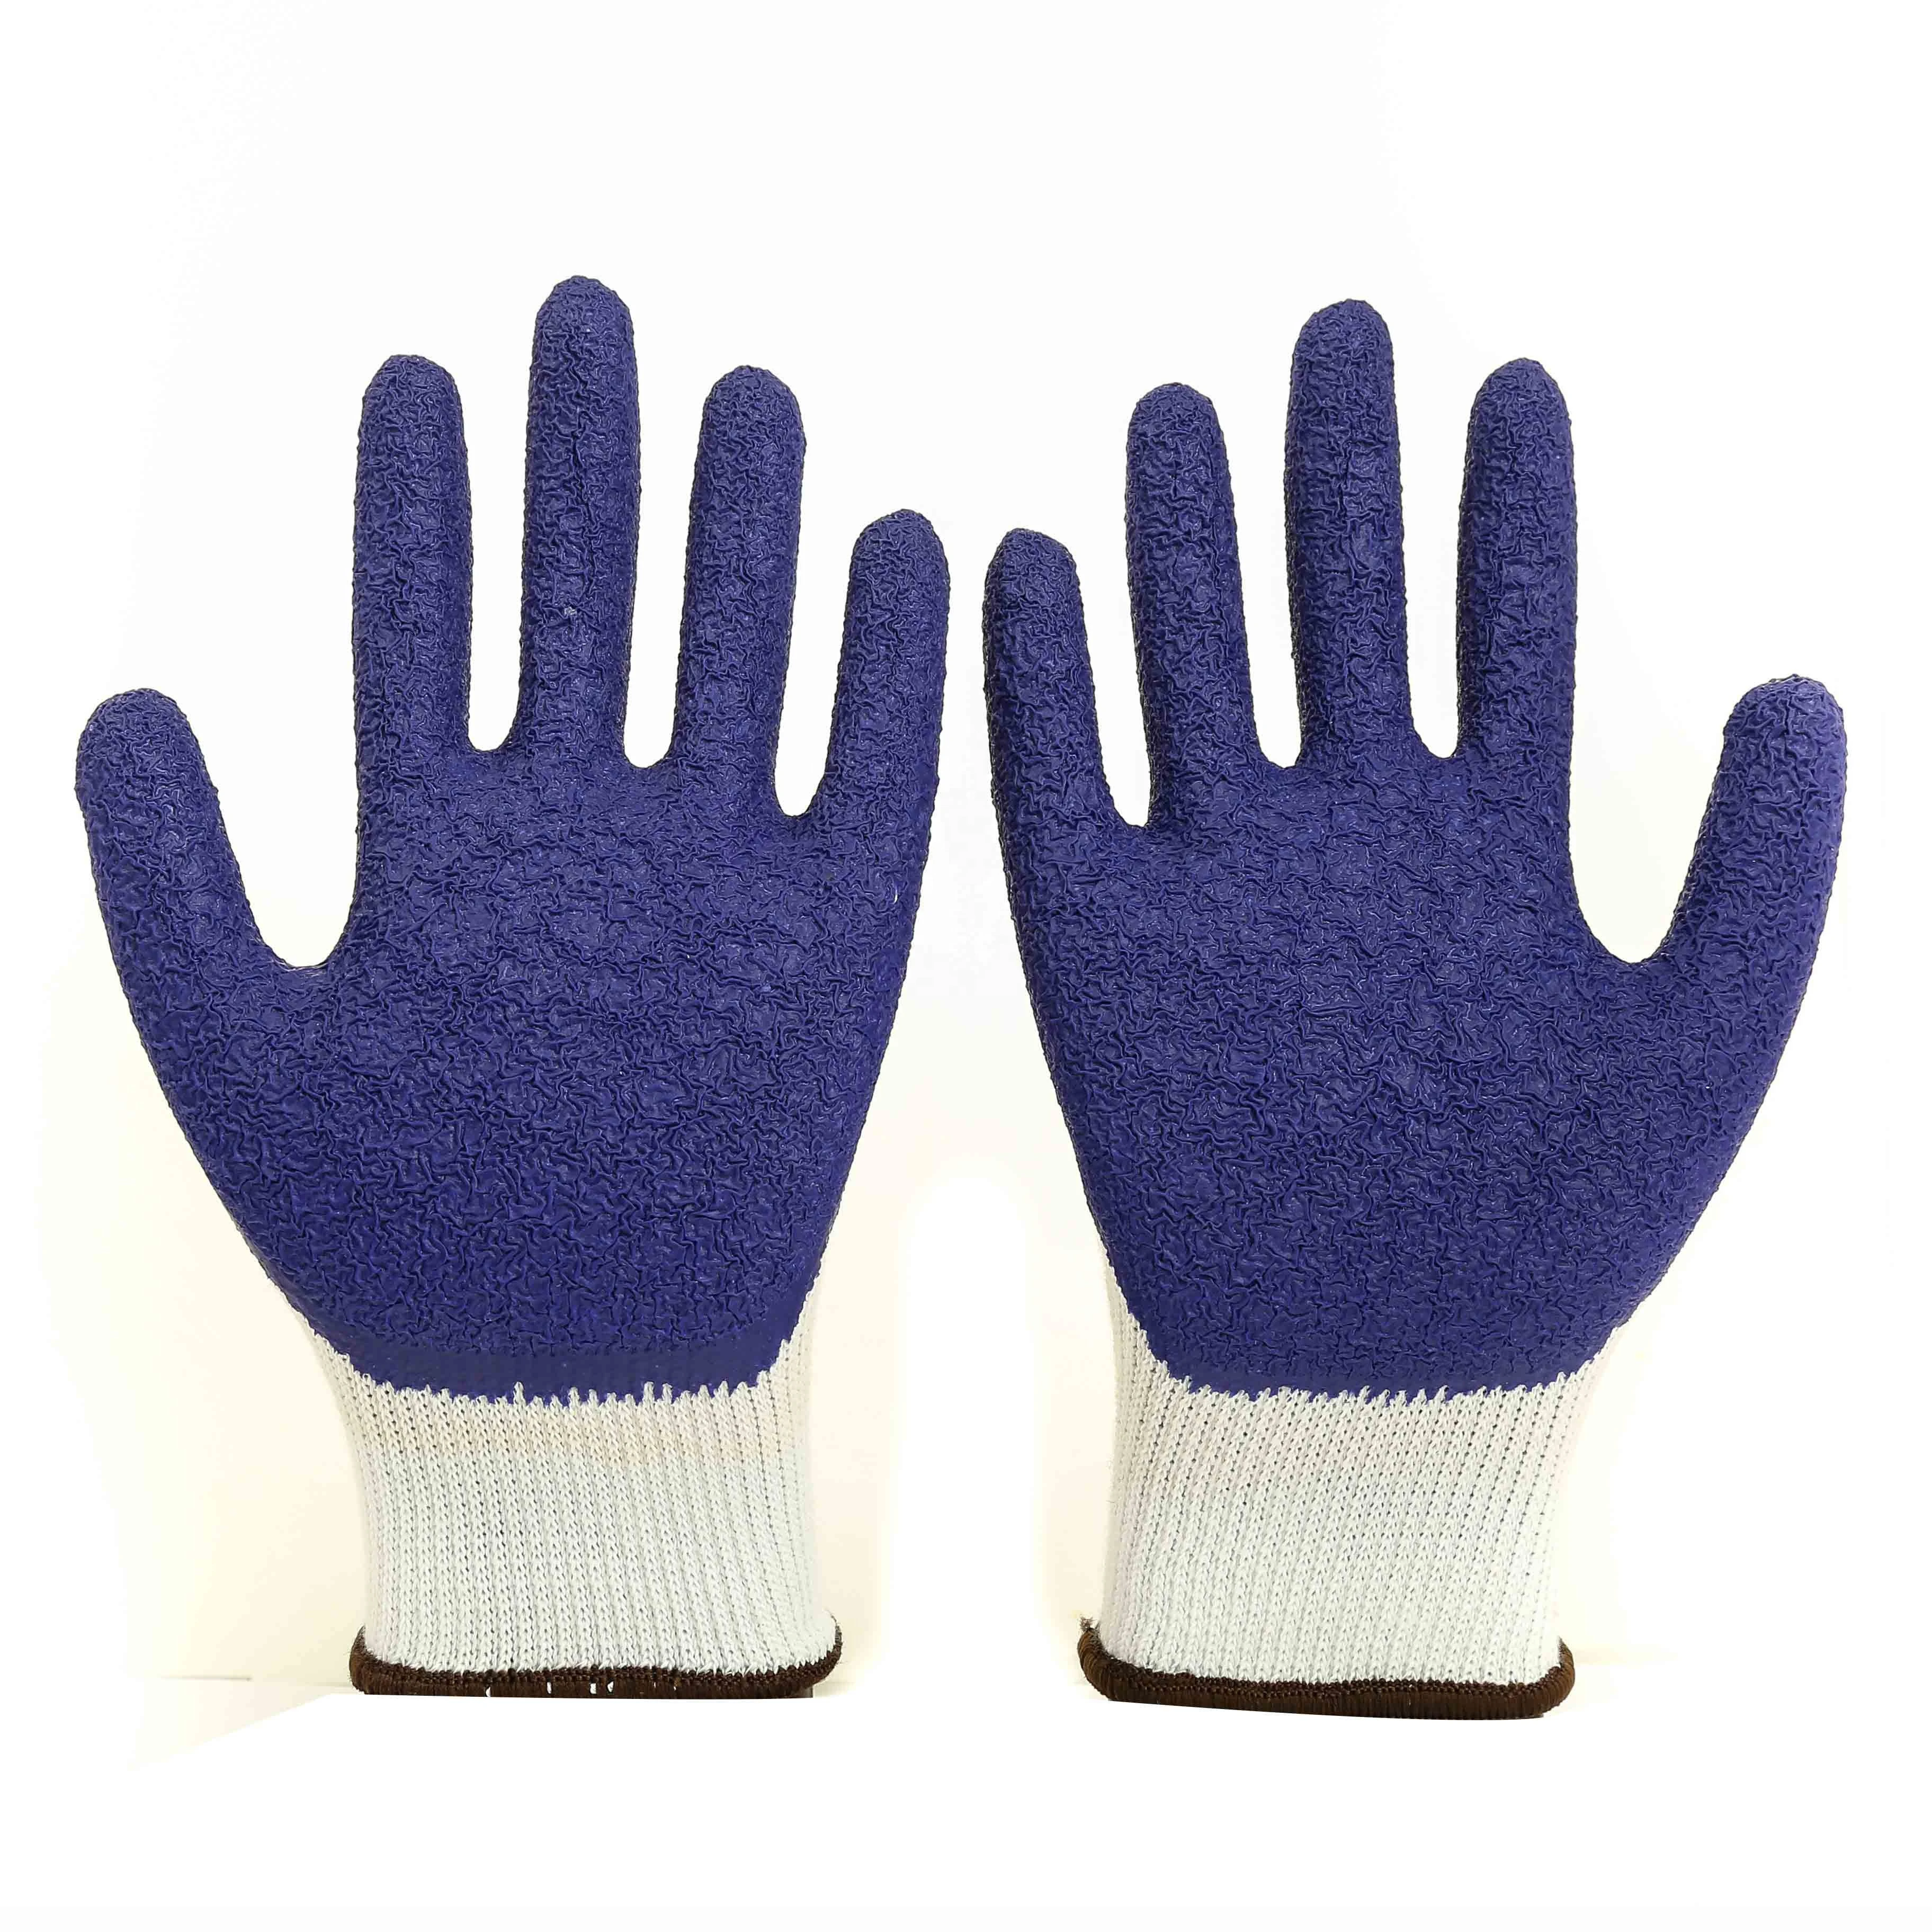 High Quality Durable Blue Latex Safety Industrial Gloves Construction Working